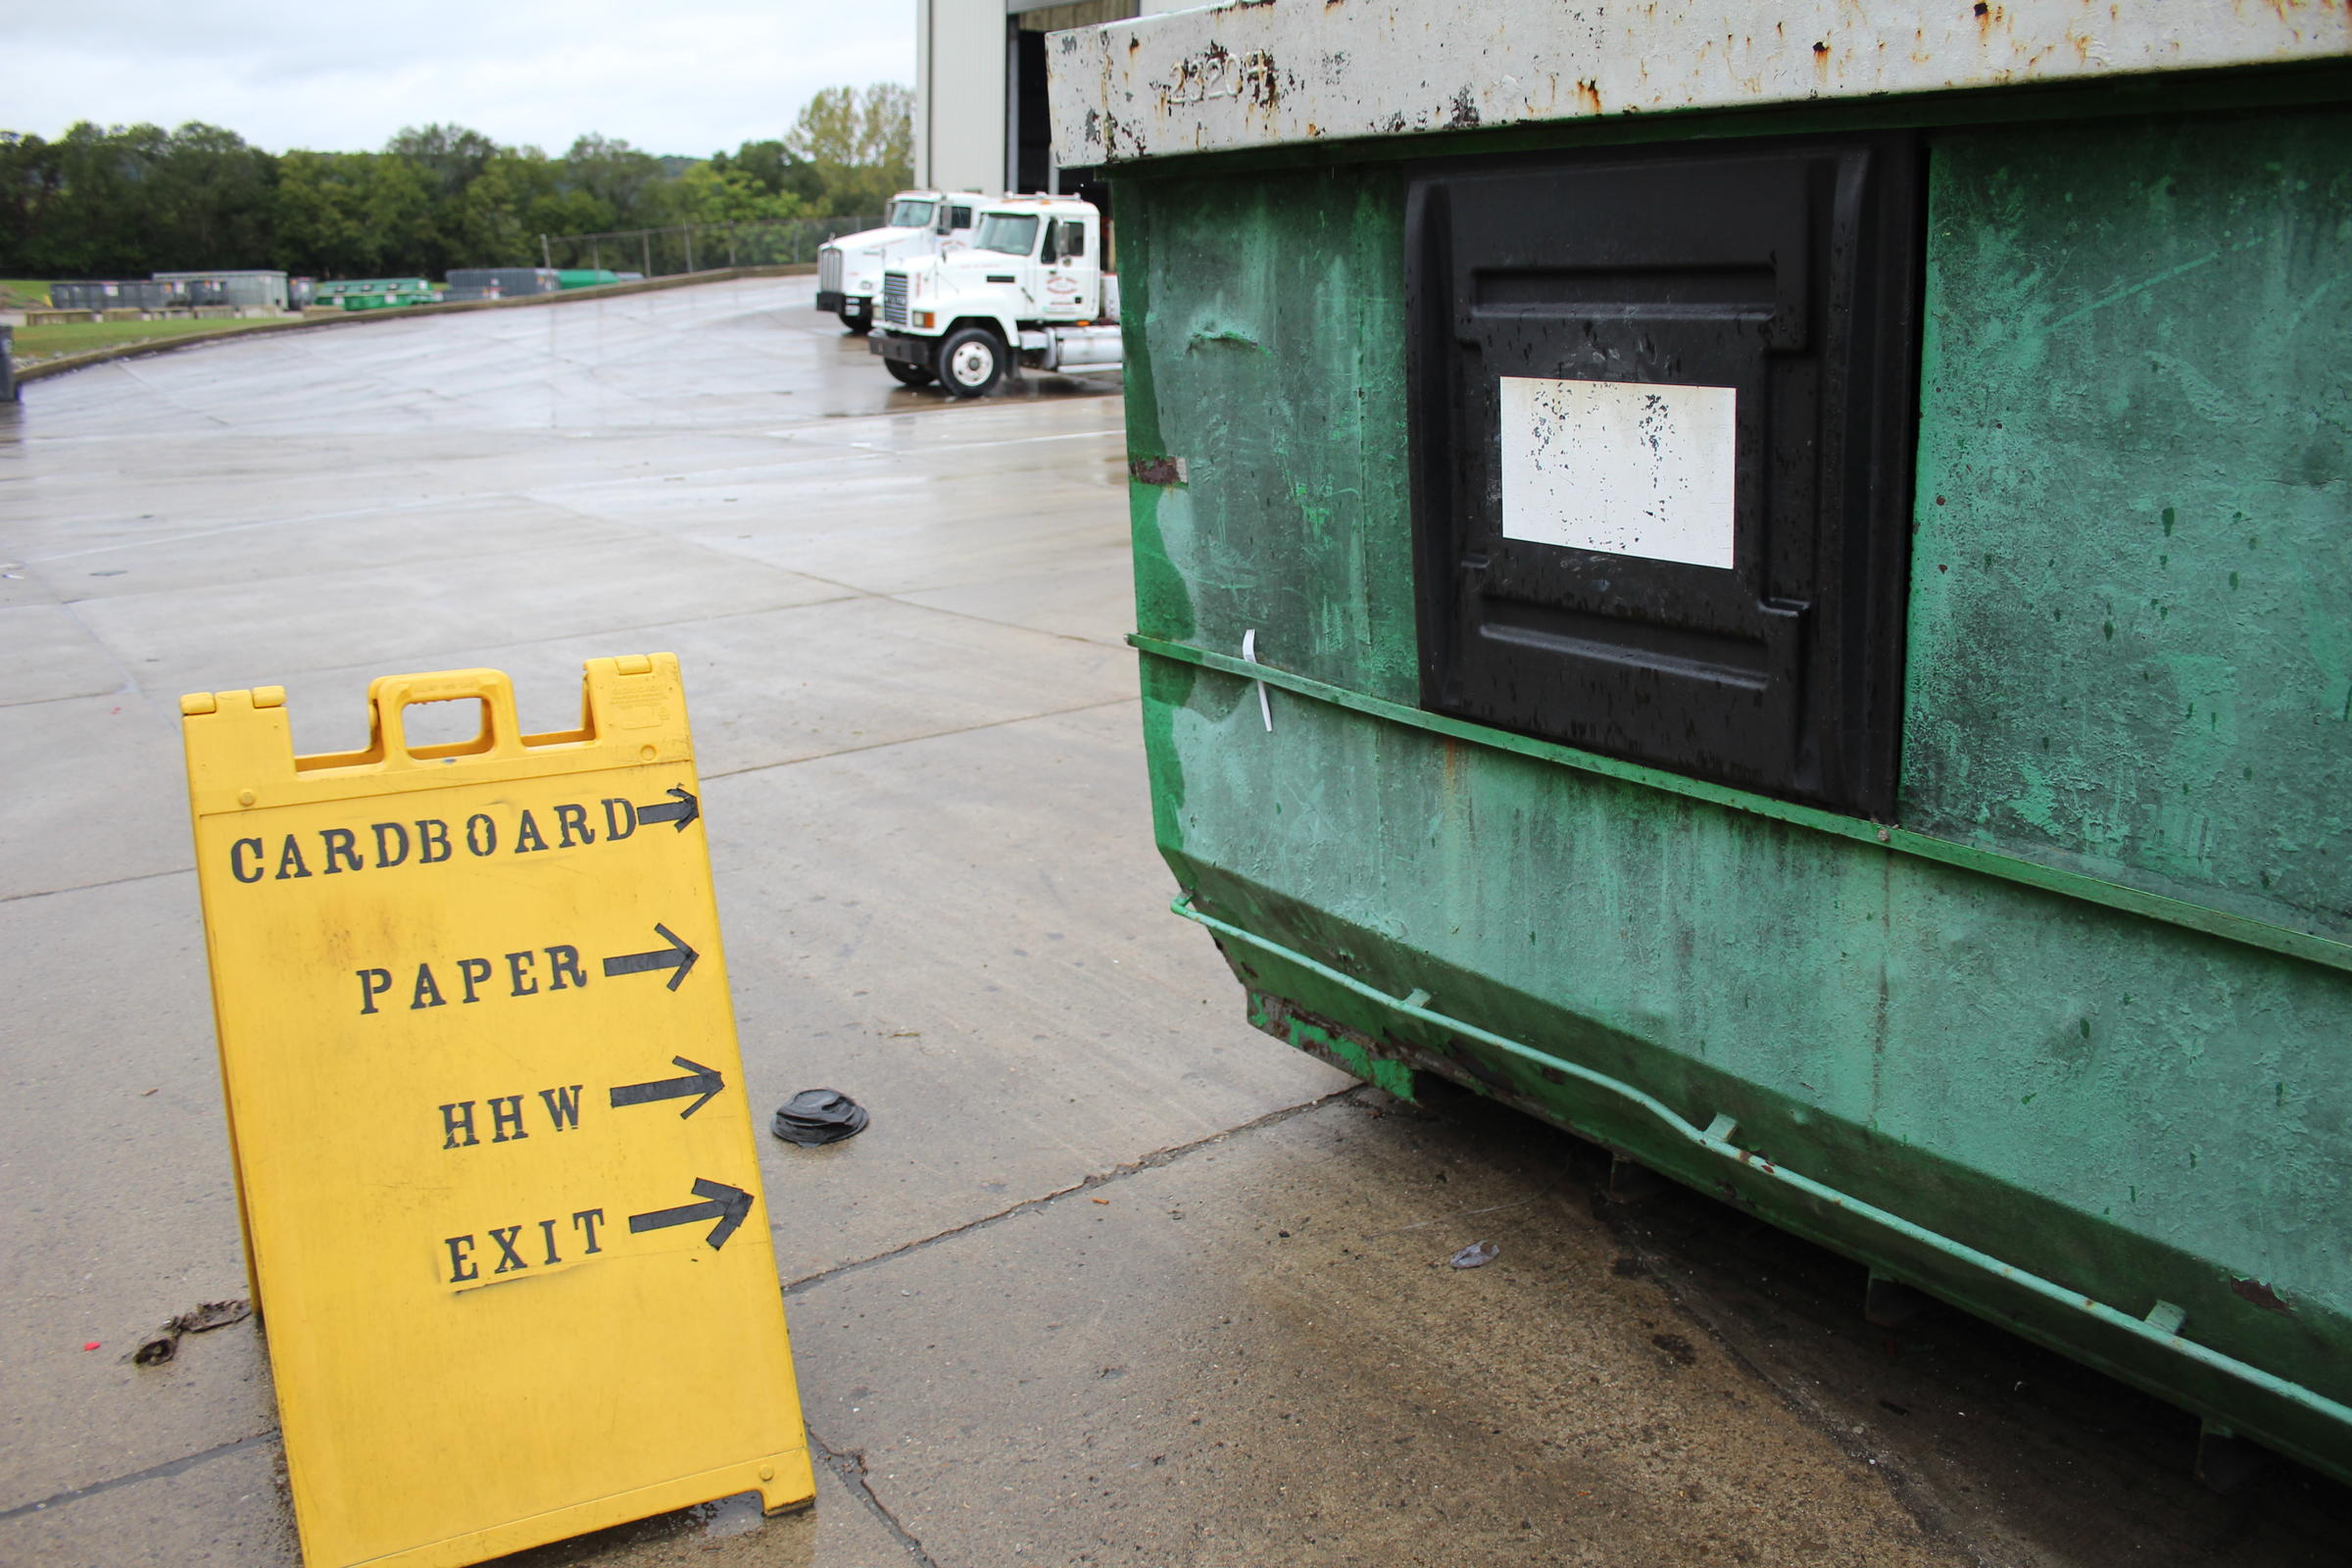 Tippecanoe County officials are hoping to include more signage around the drop-off sites. Currently, many of the bins aren't labeled and the signs are unclear.